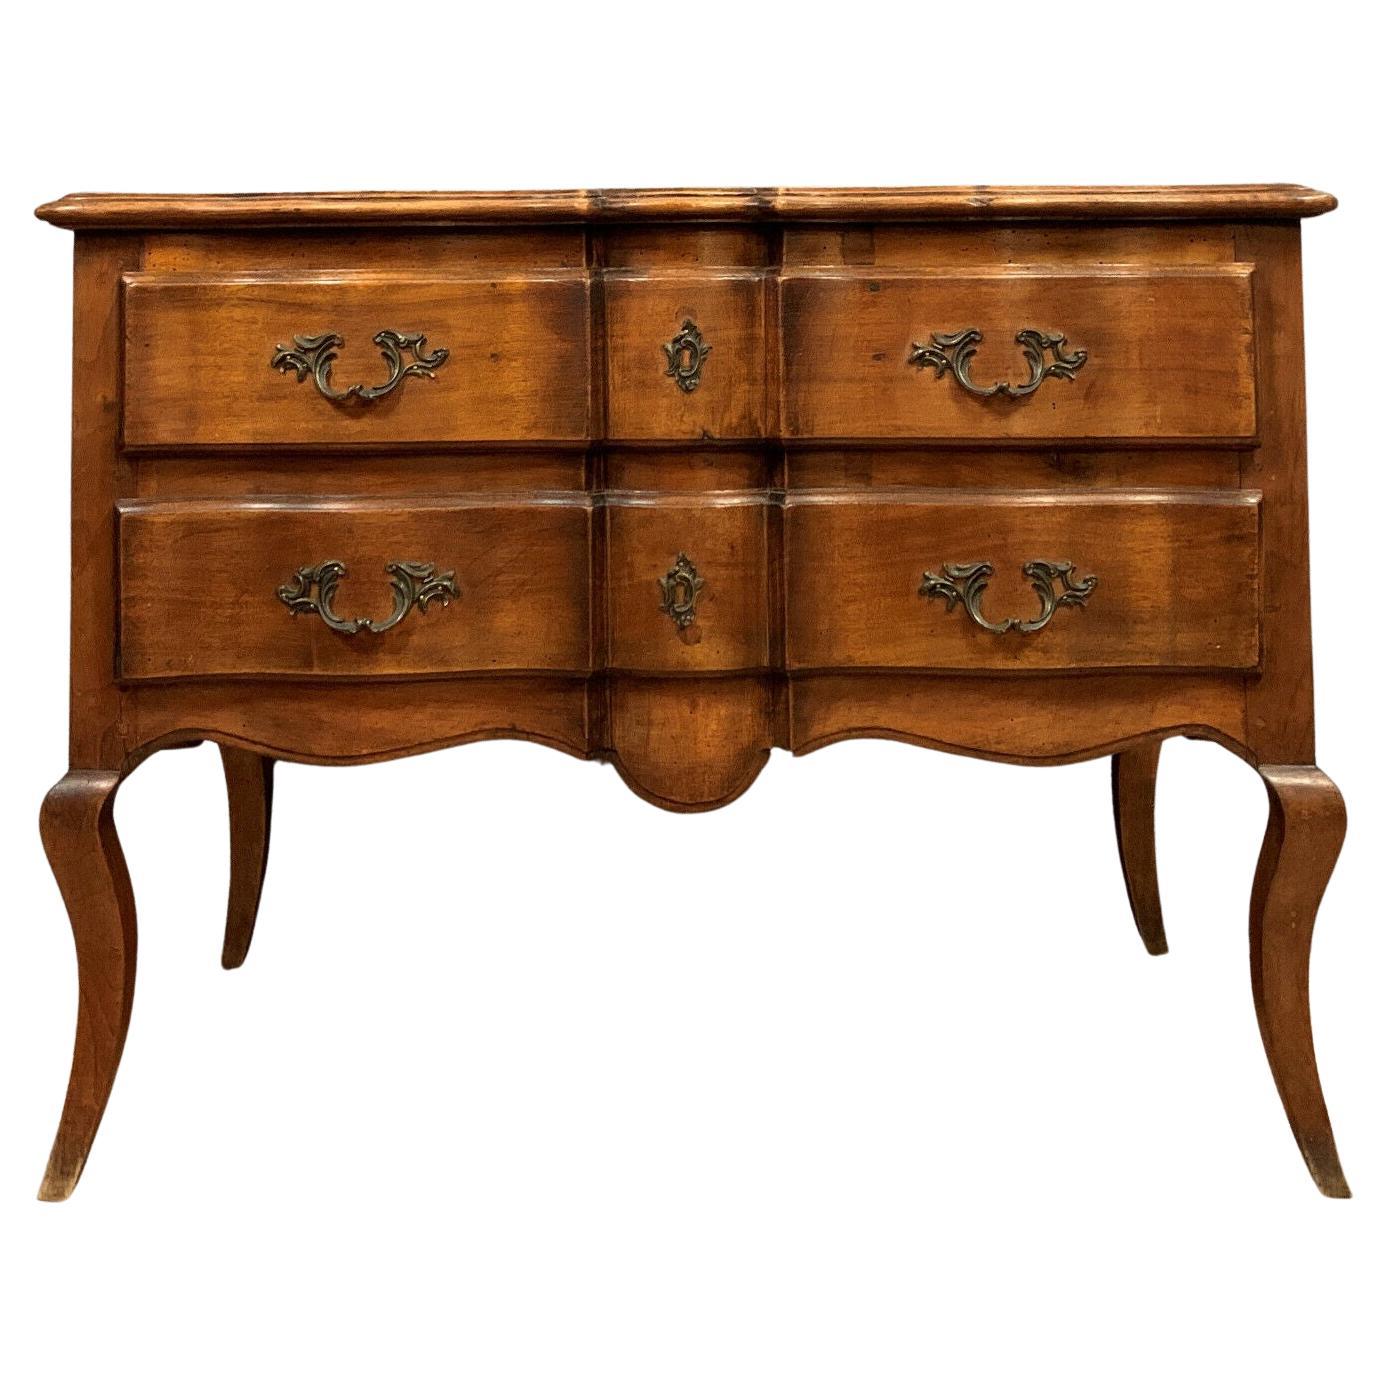 Exquisite Louis XV Style Solid Walnut Bombe Commode circa 1880 -1X14